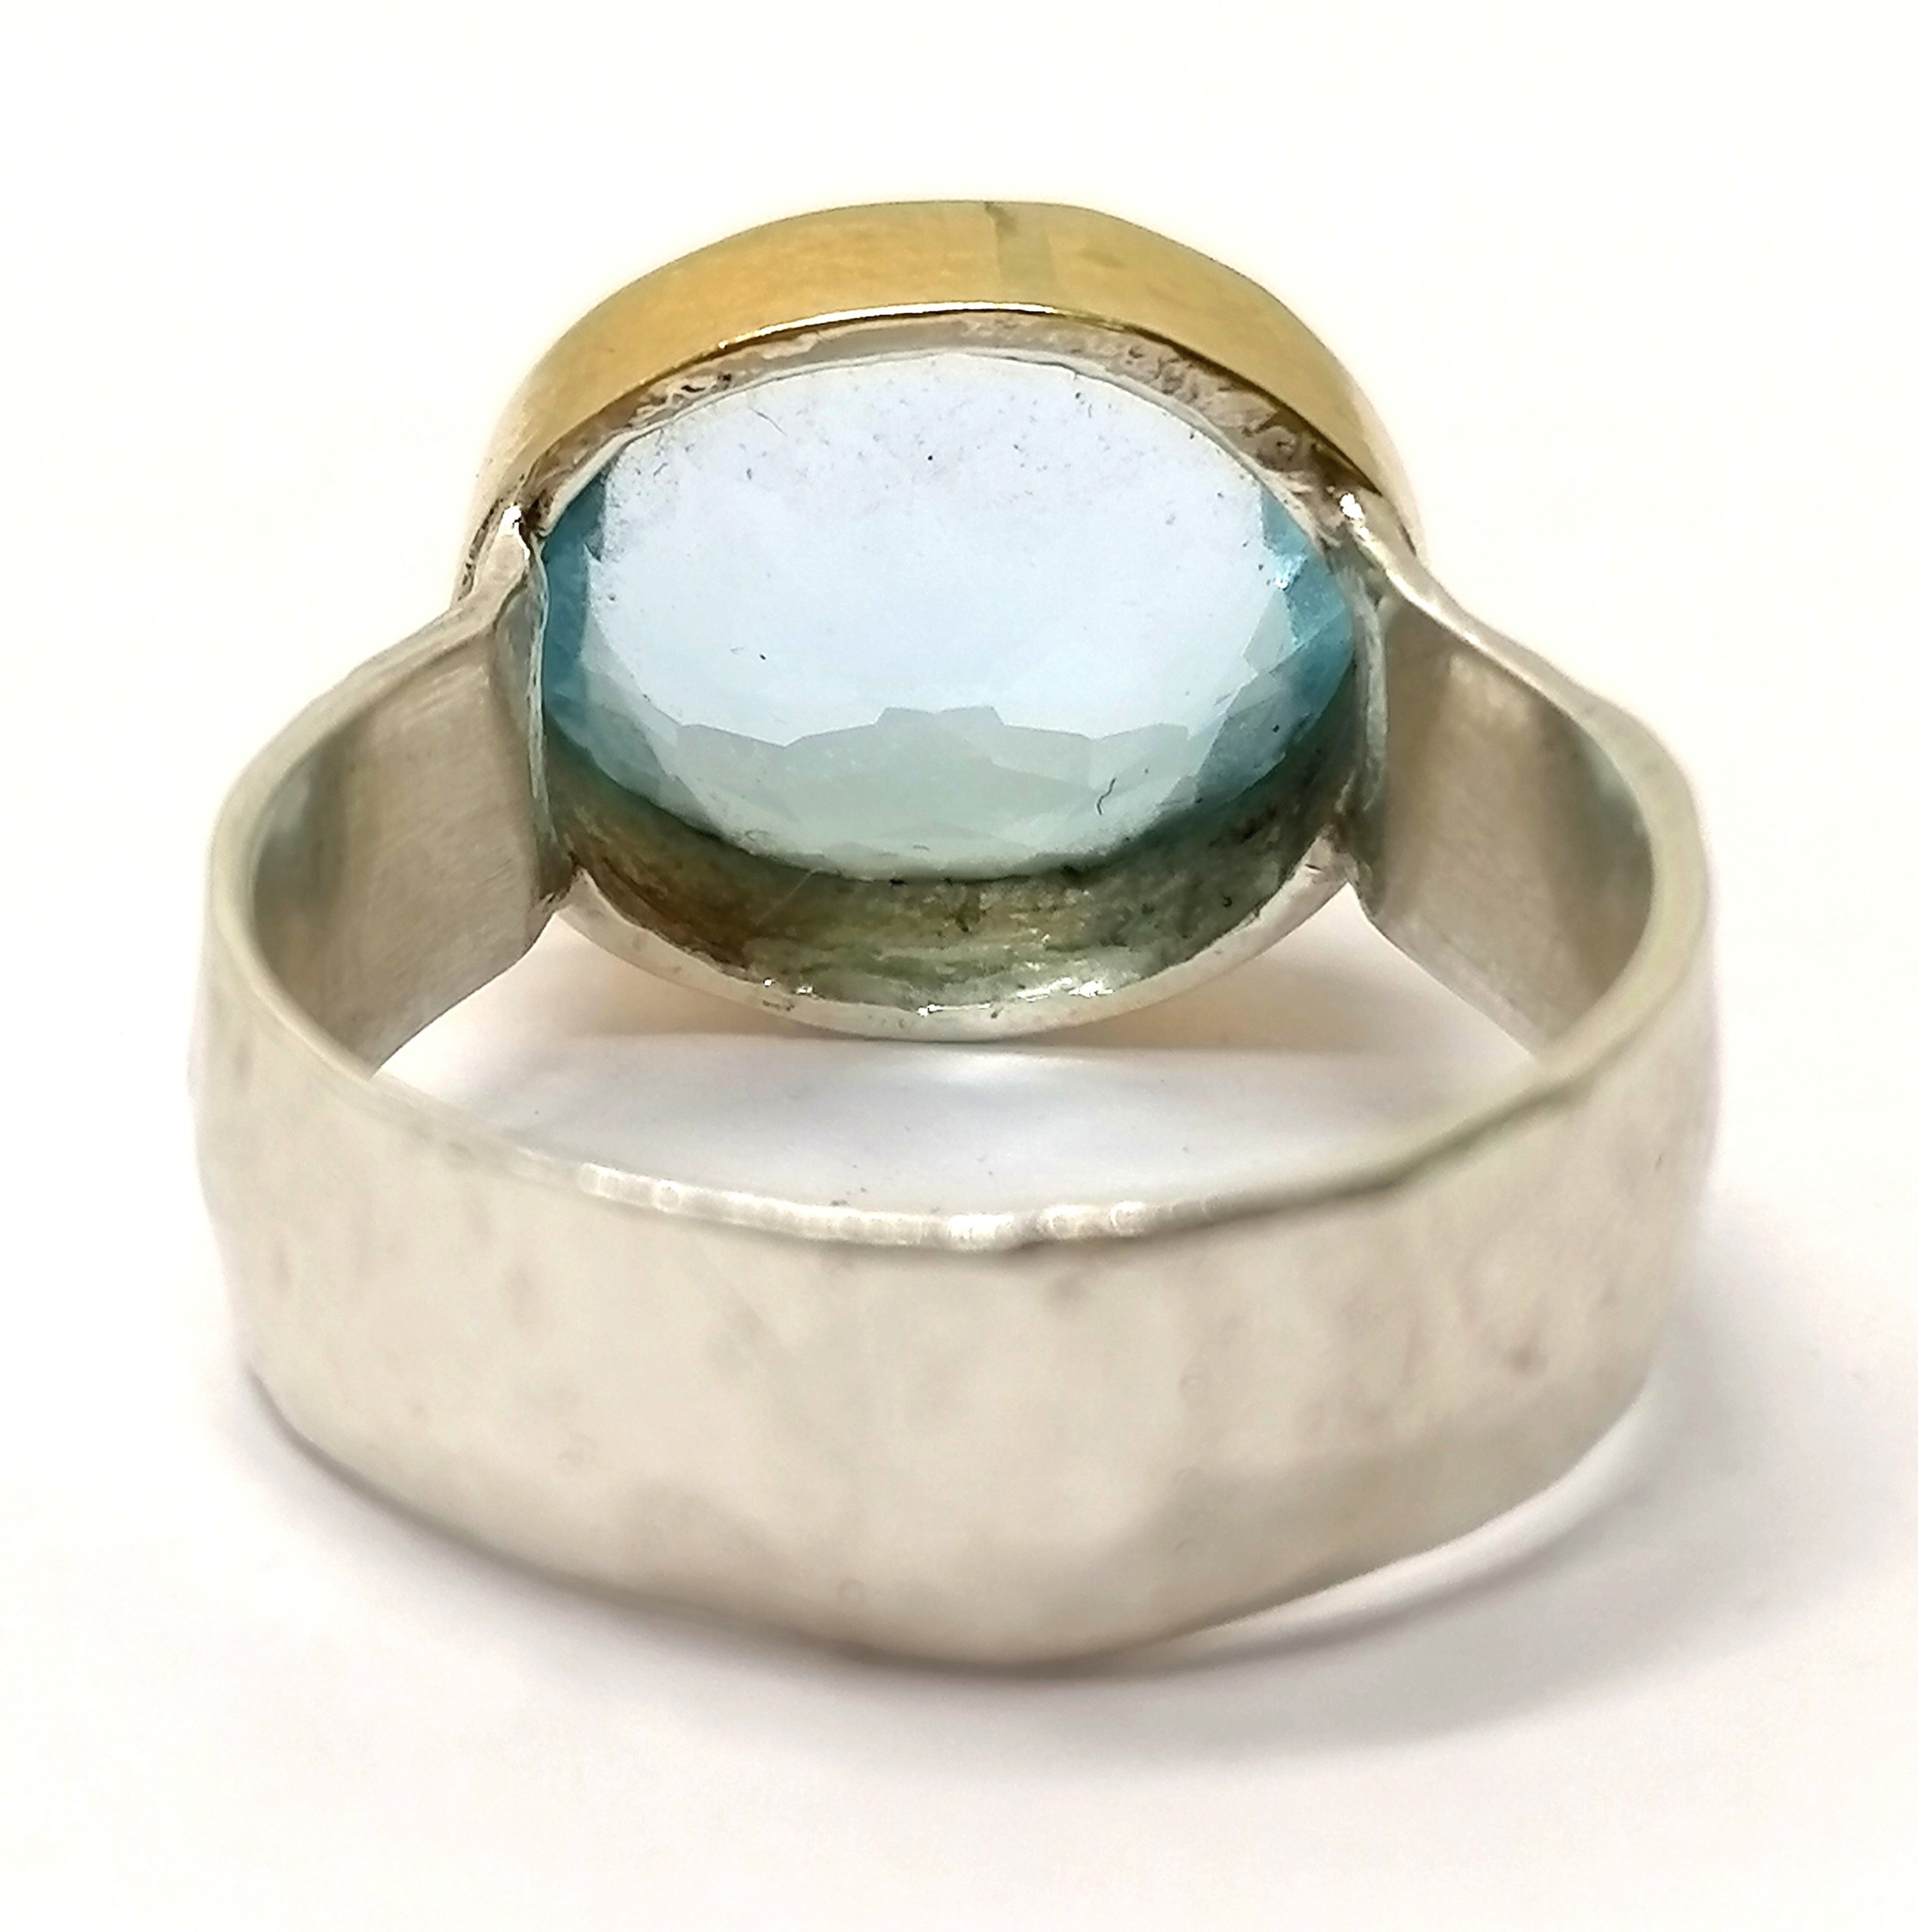 Silver blue topaz ring with unmarked gold mount and planished detail to shank - size Q½ & 6.9g - Image 3 of 3